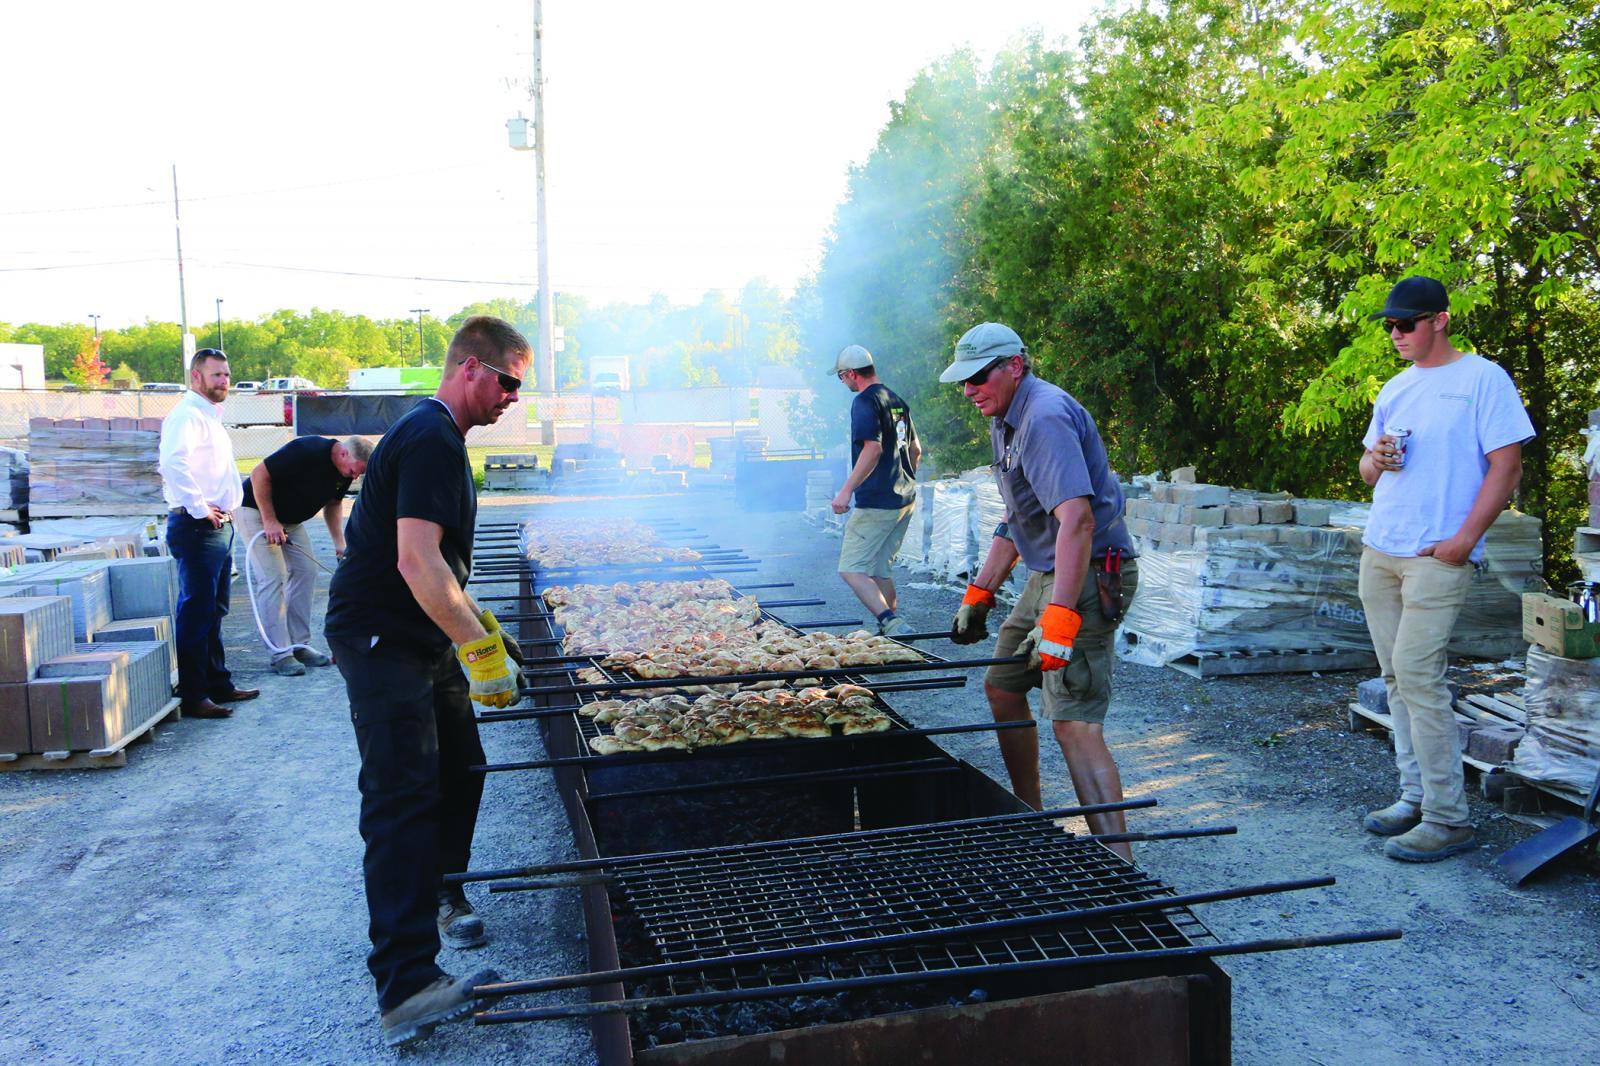 Charcoal cooked chicken, led by Paul DeGroot (right), is the cornerstone of the Golden Horseshoe Chapter’s annual social event.